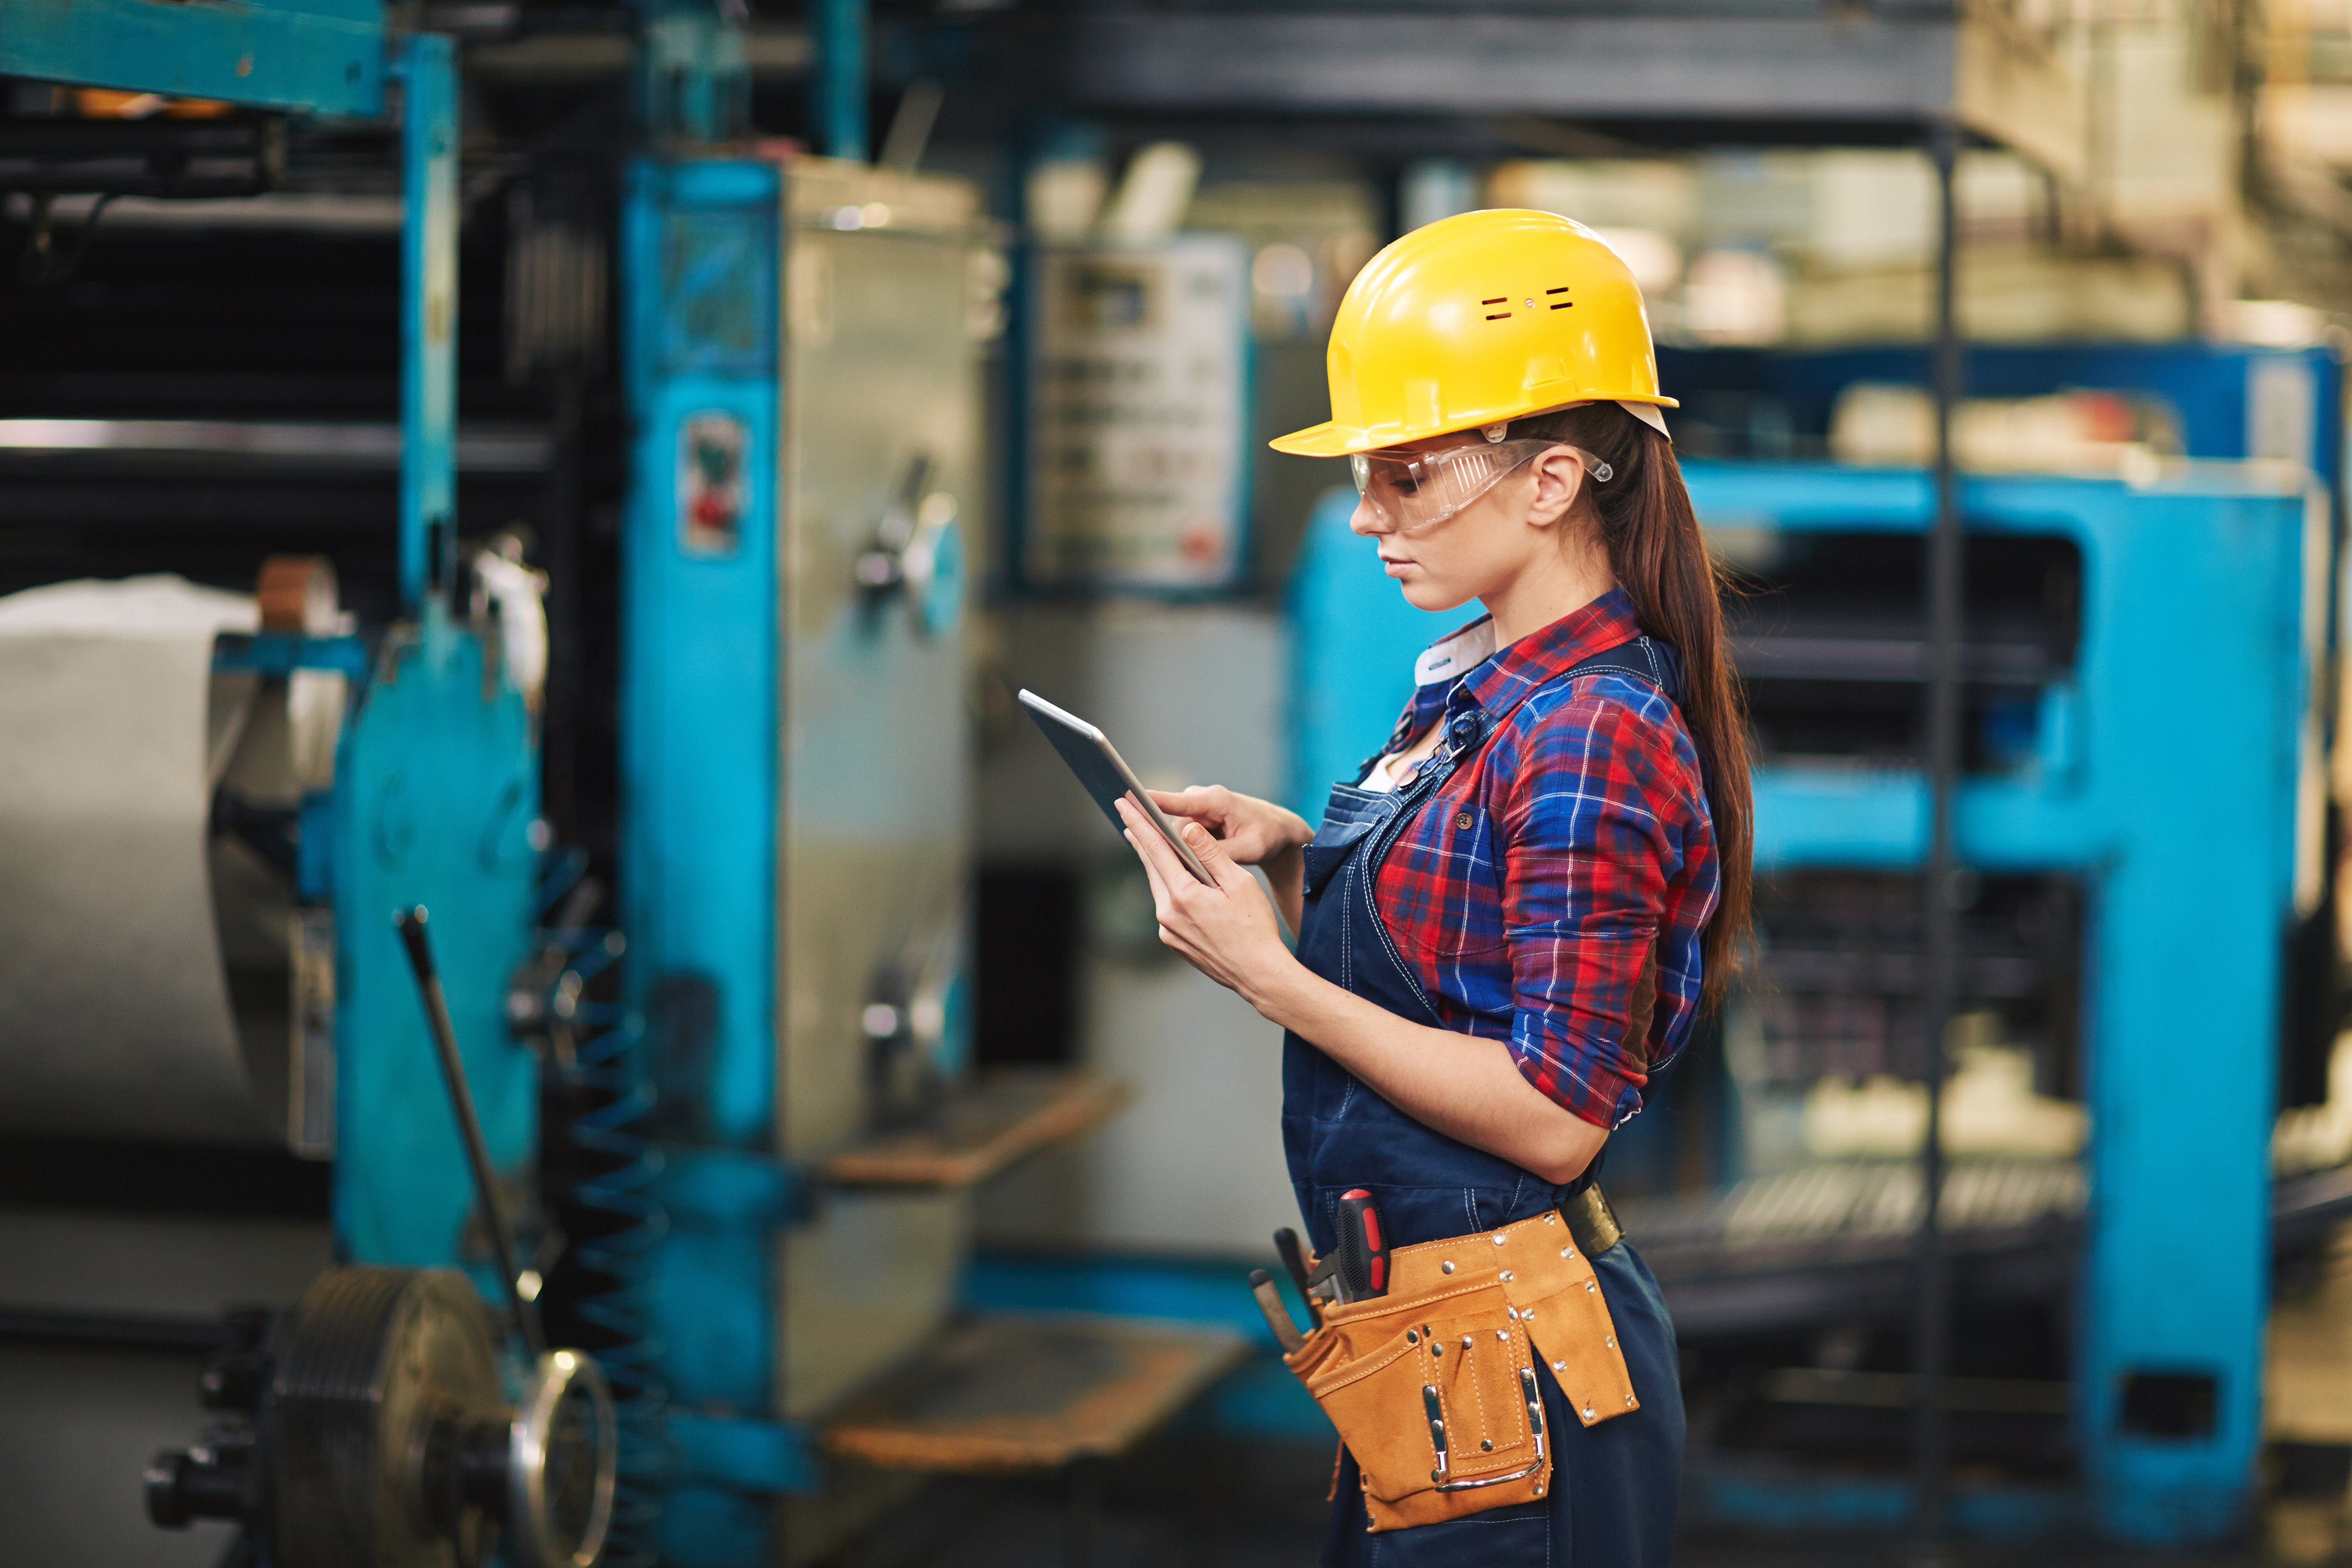 woman in a yellow construction hat wearing a checkered shirt and a toolbelt, looking at an iPad in a manufacturing facility